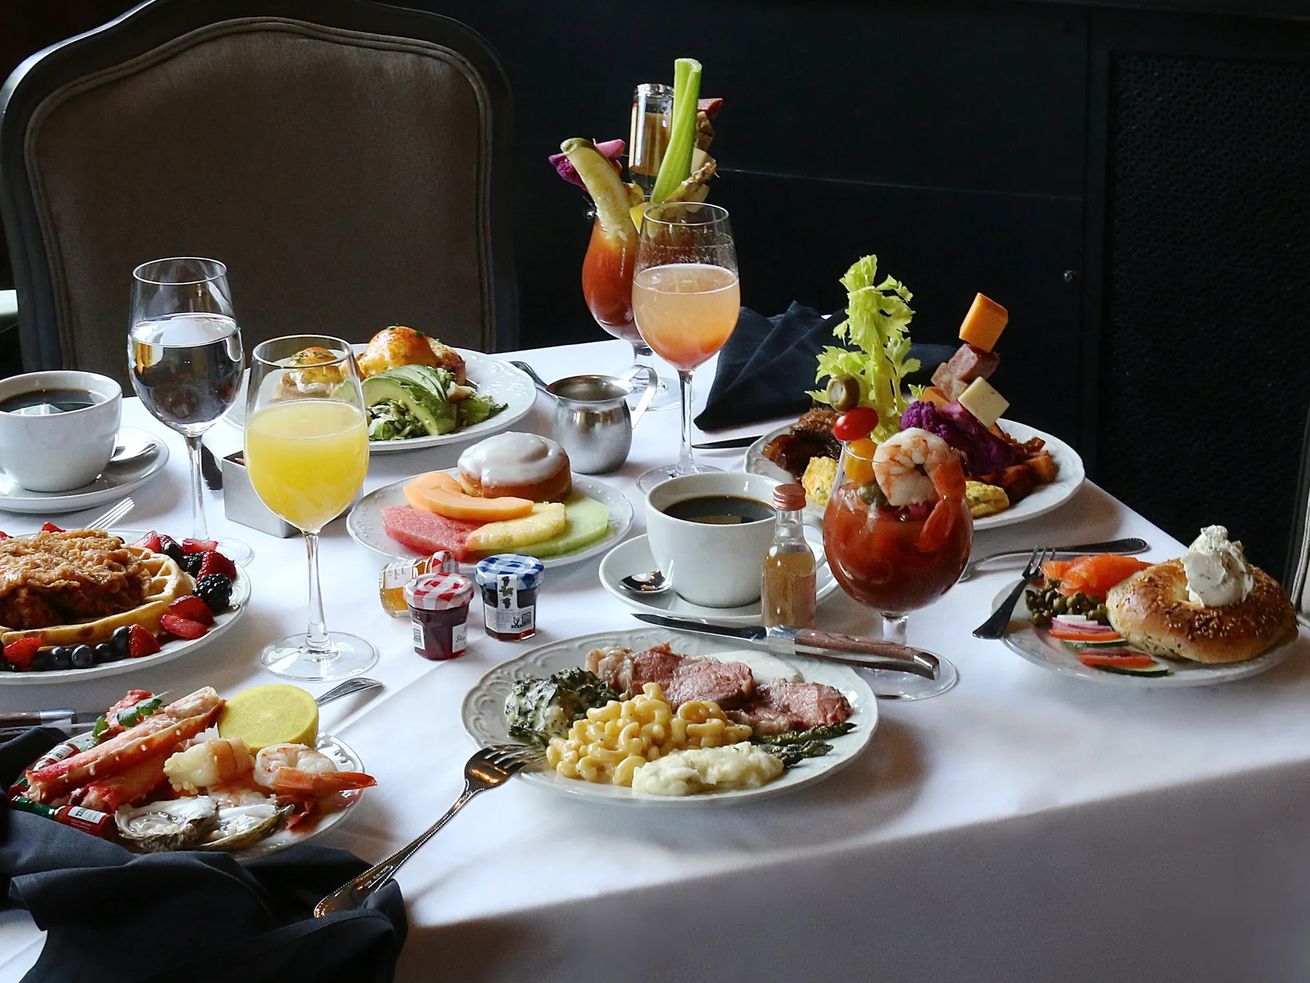 Brunch dishes and beverages spread out on a table.